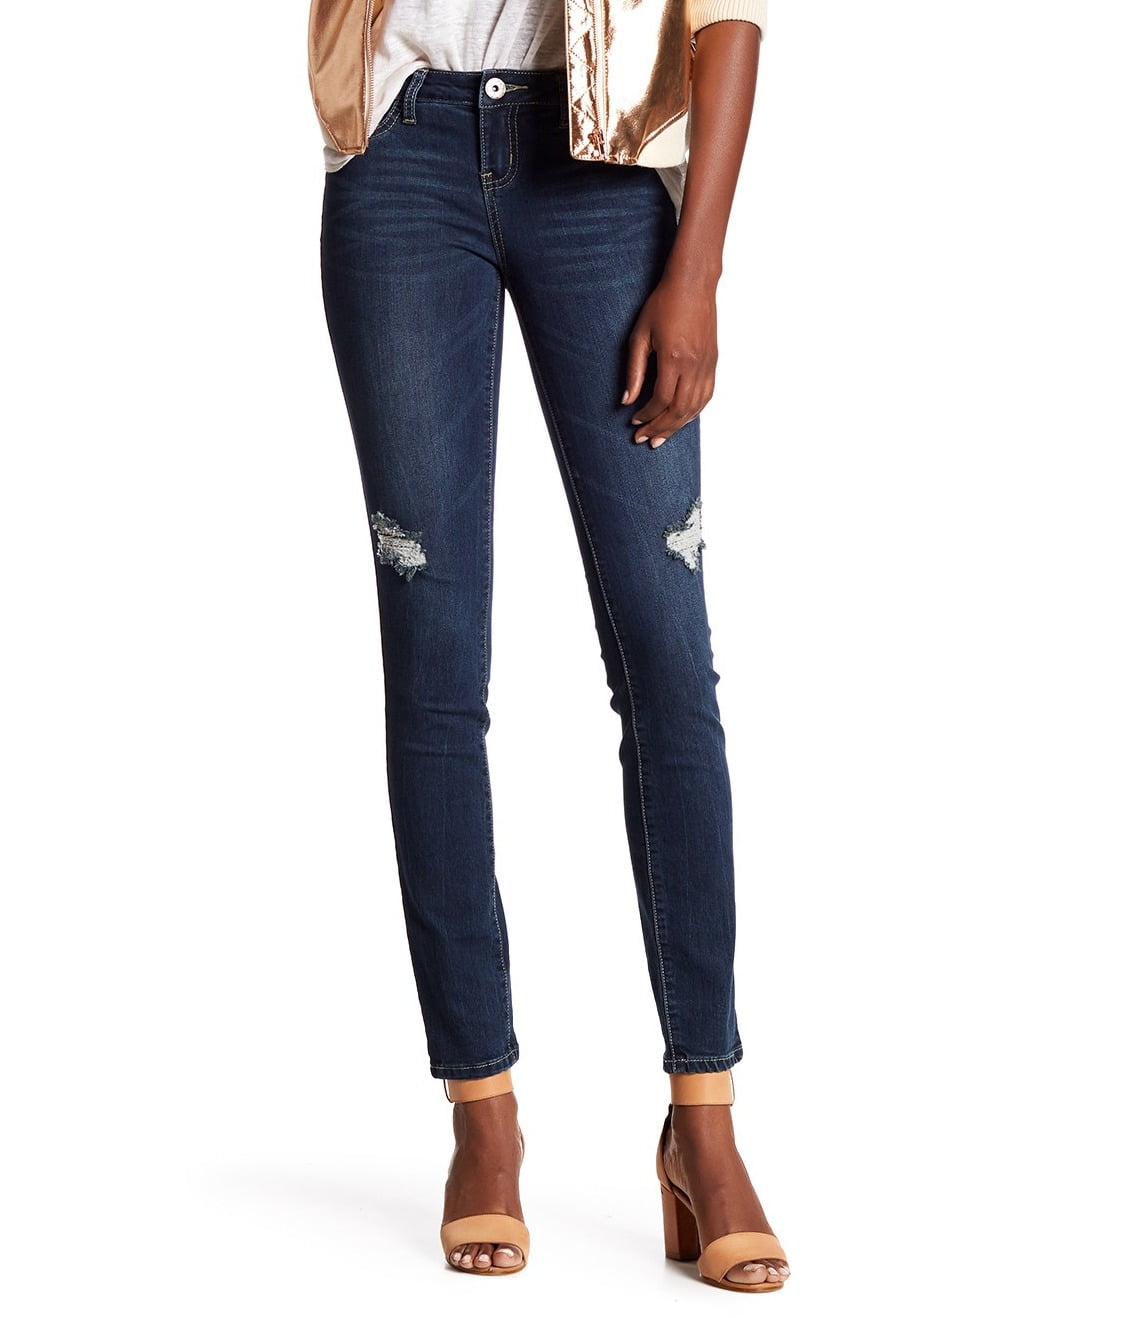 sound girl jeans